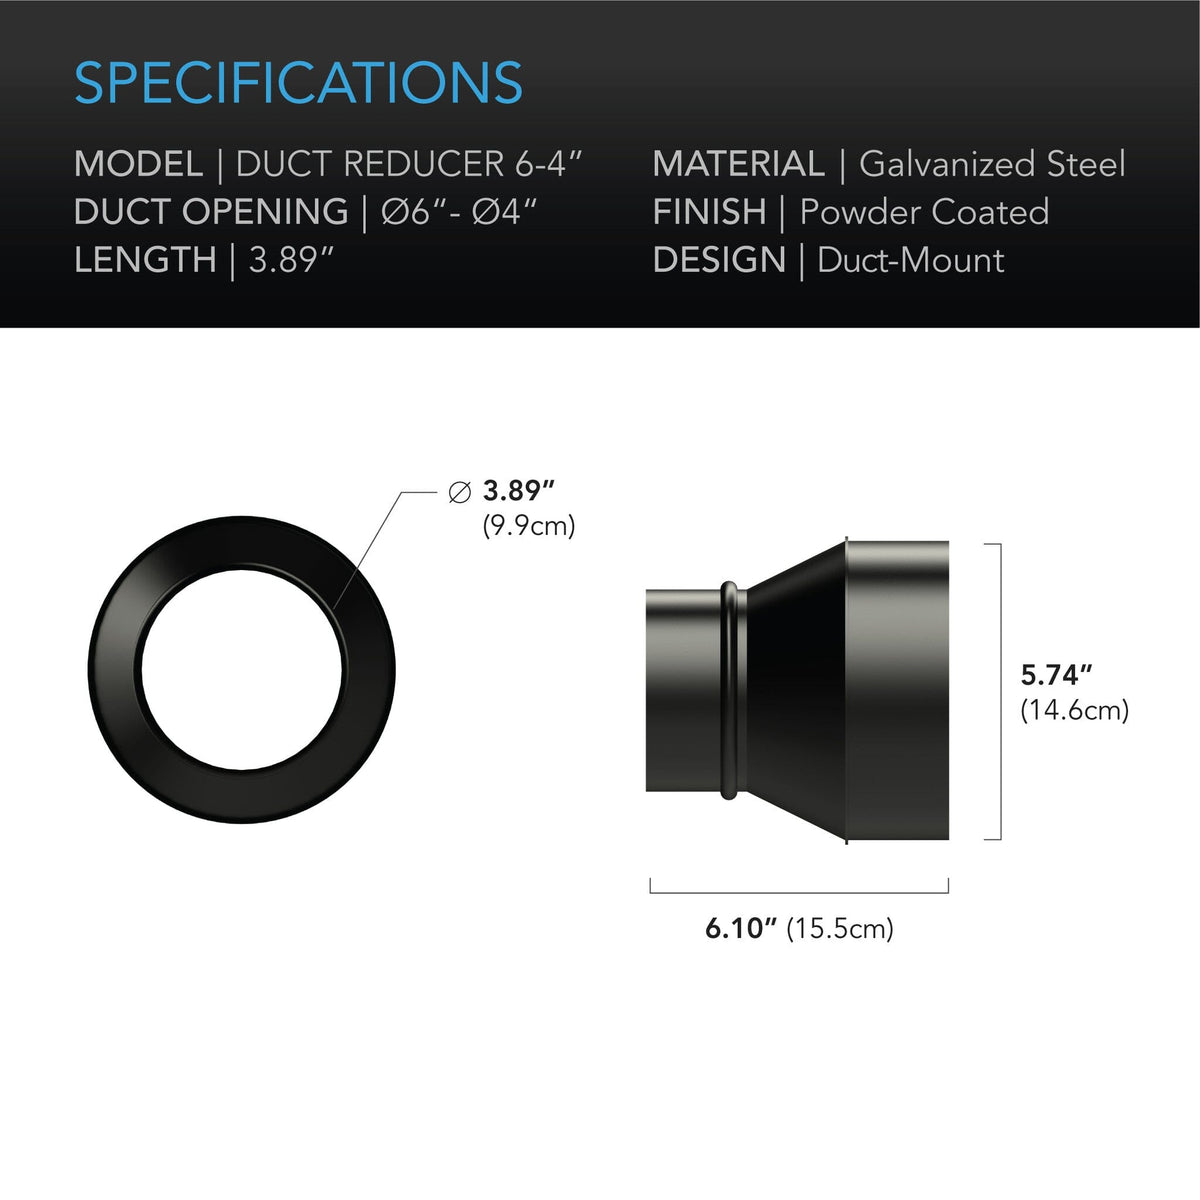 Duct reducers specifications